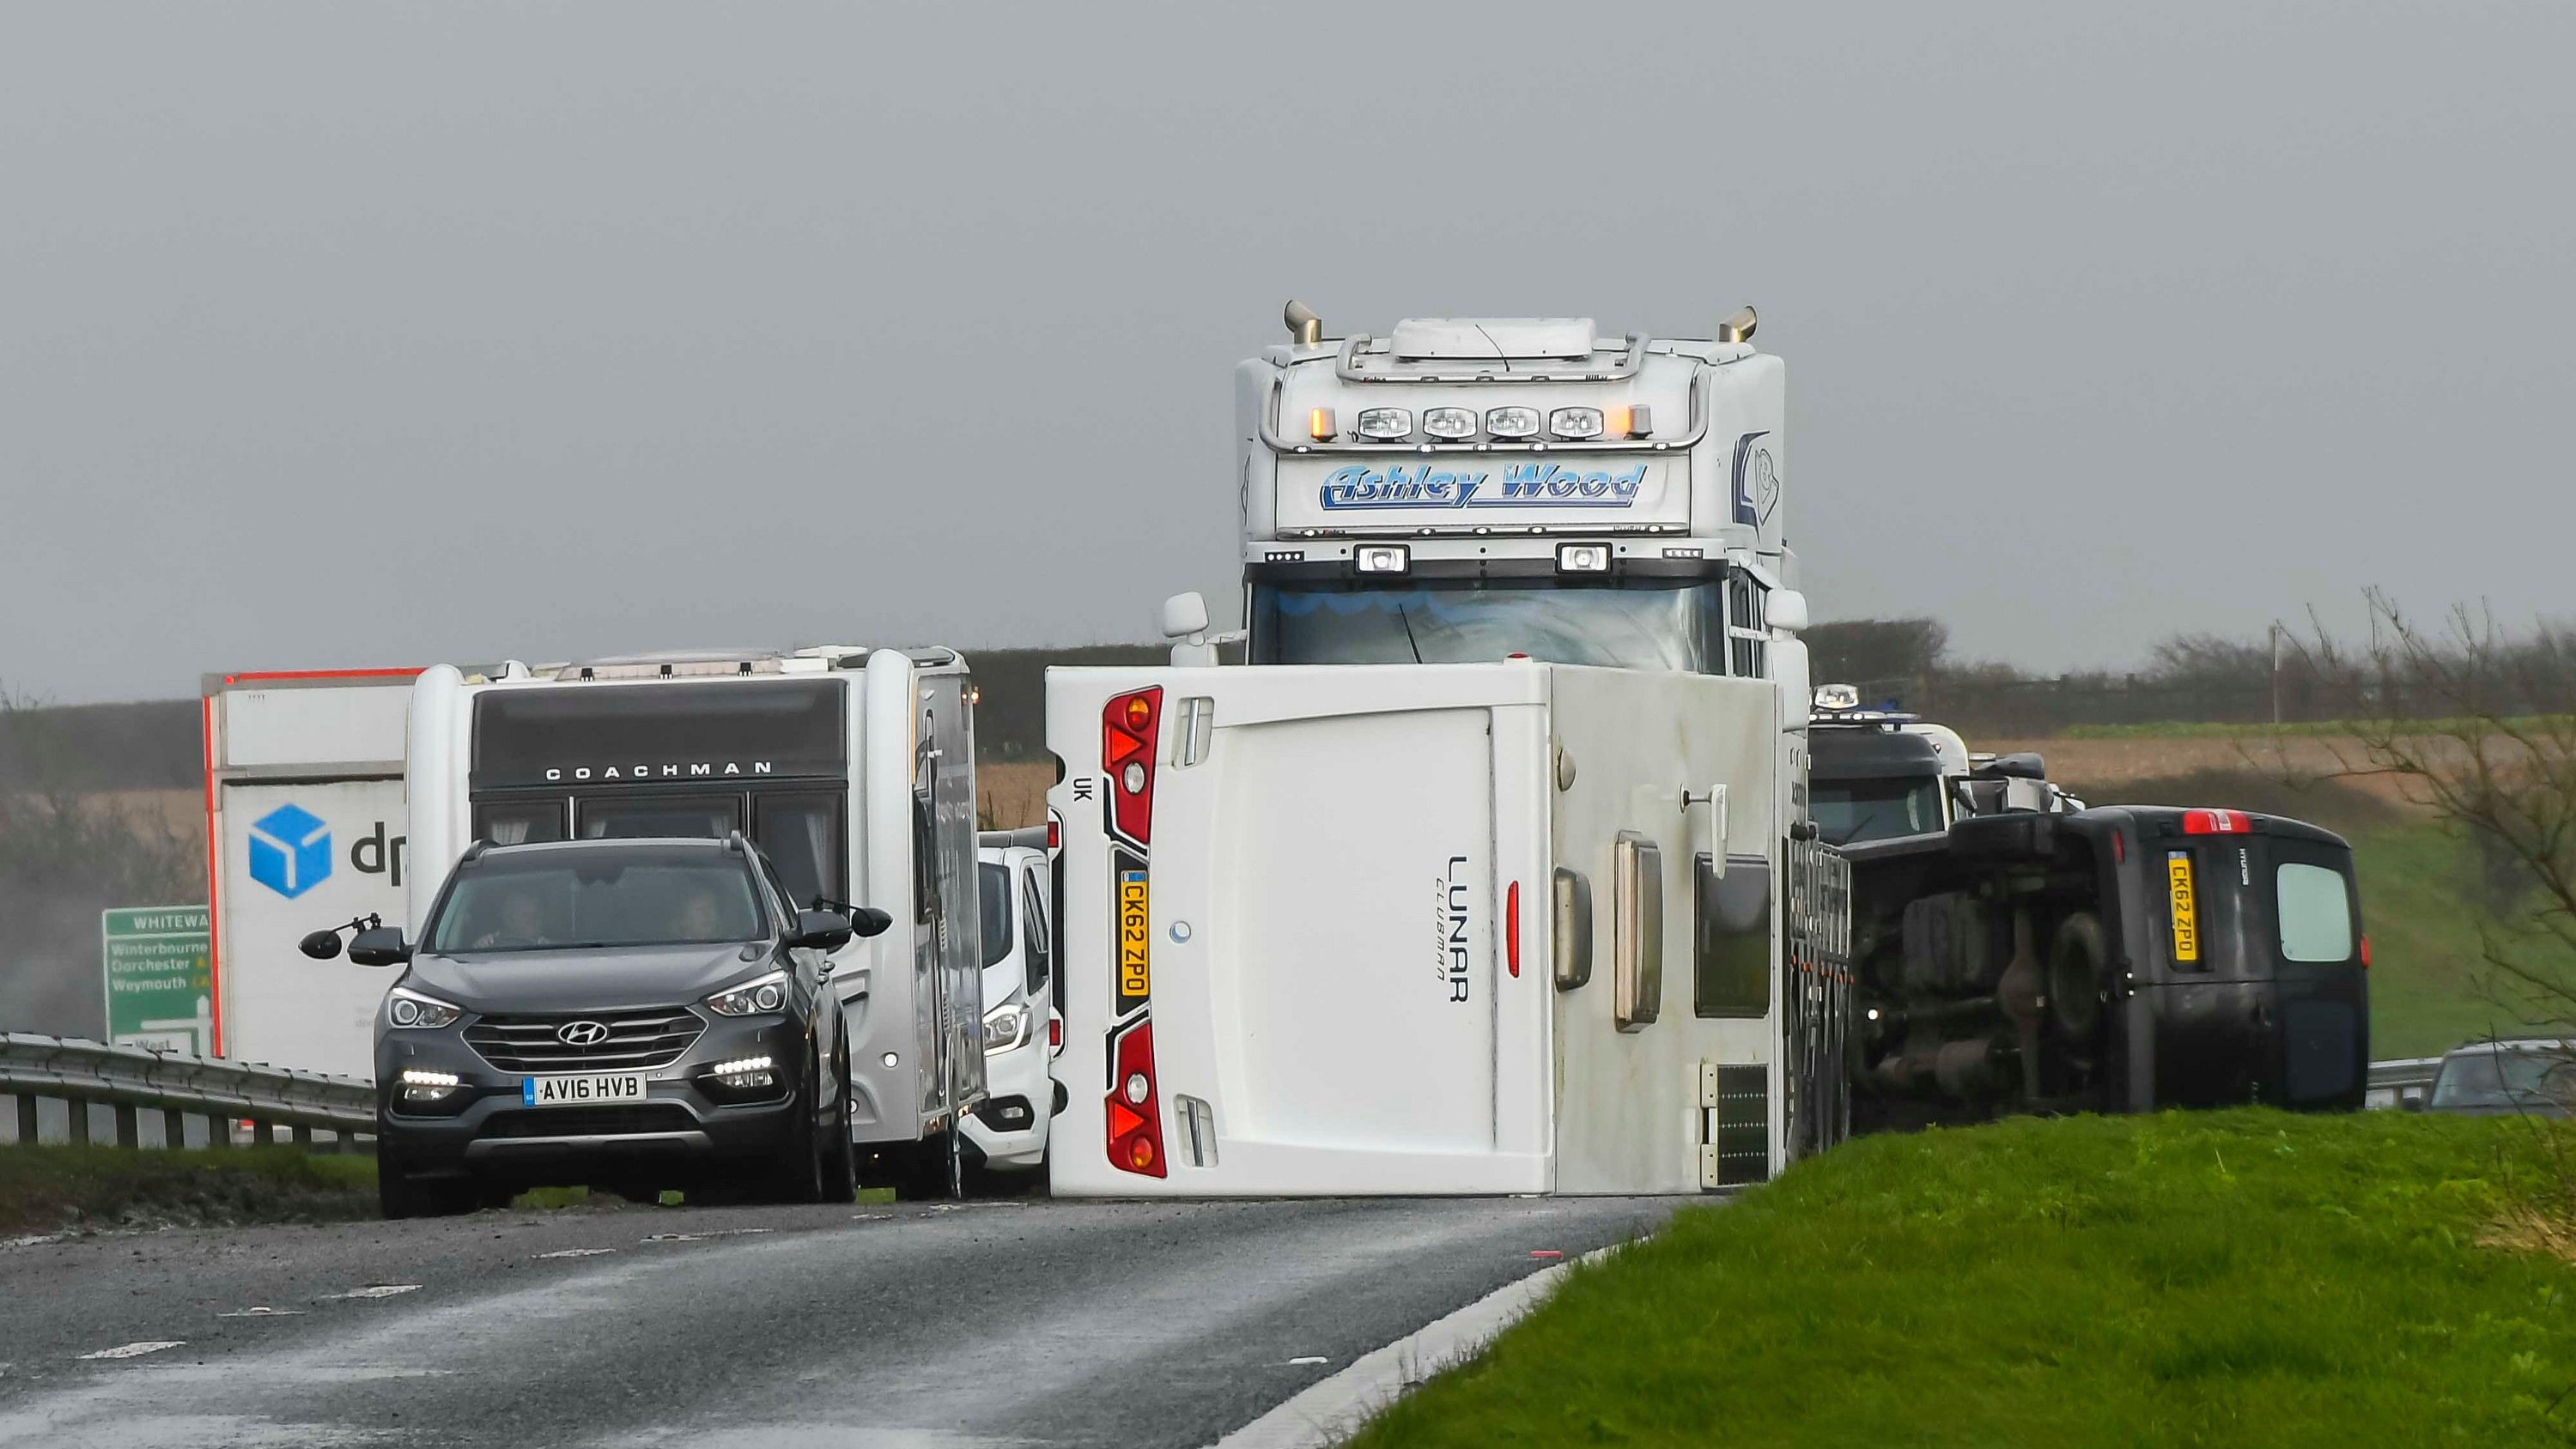 A van towing a caravan was blown over by gale force winds from Storm Nelson, blocking one lane of the A35 at Litton Cheney in Dorset